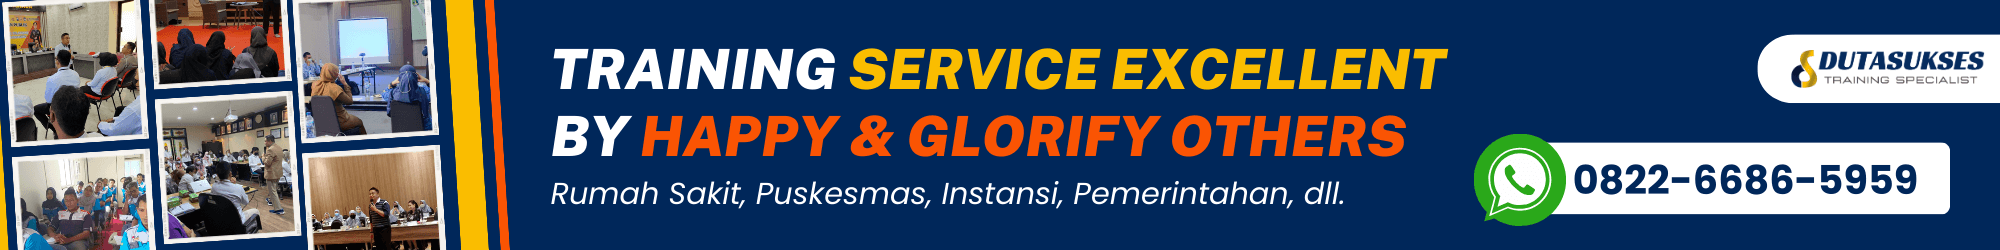 Training Service Excellent: By Happy & Glorify Others